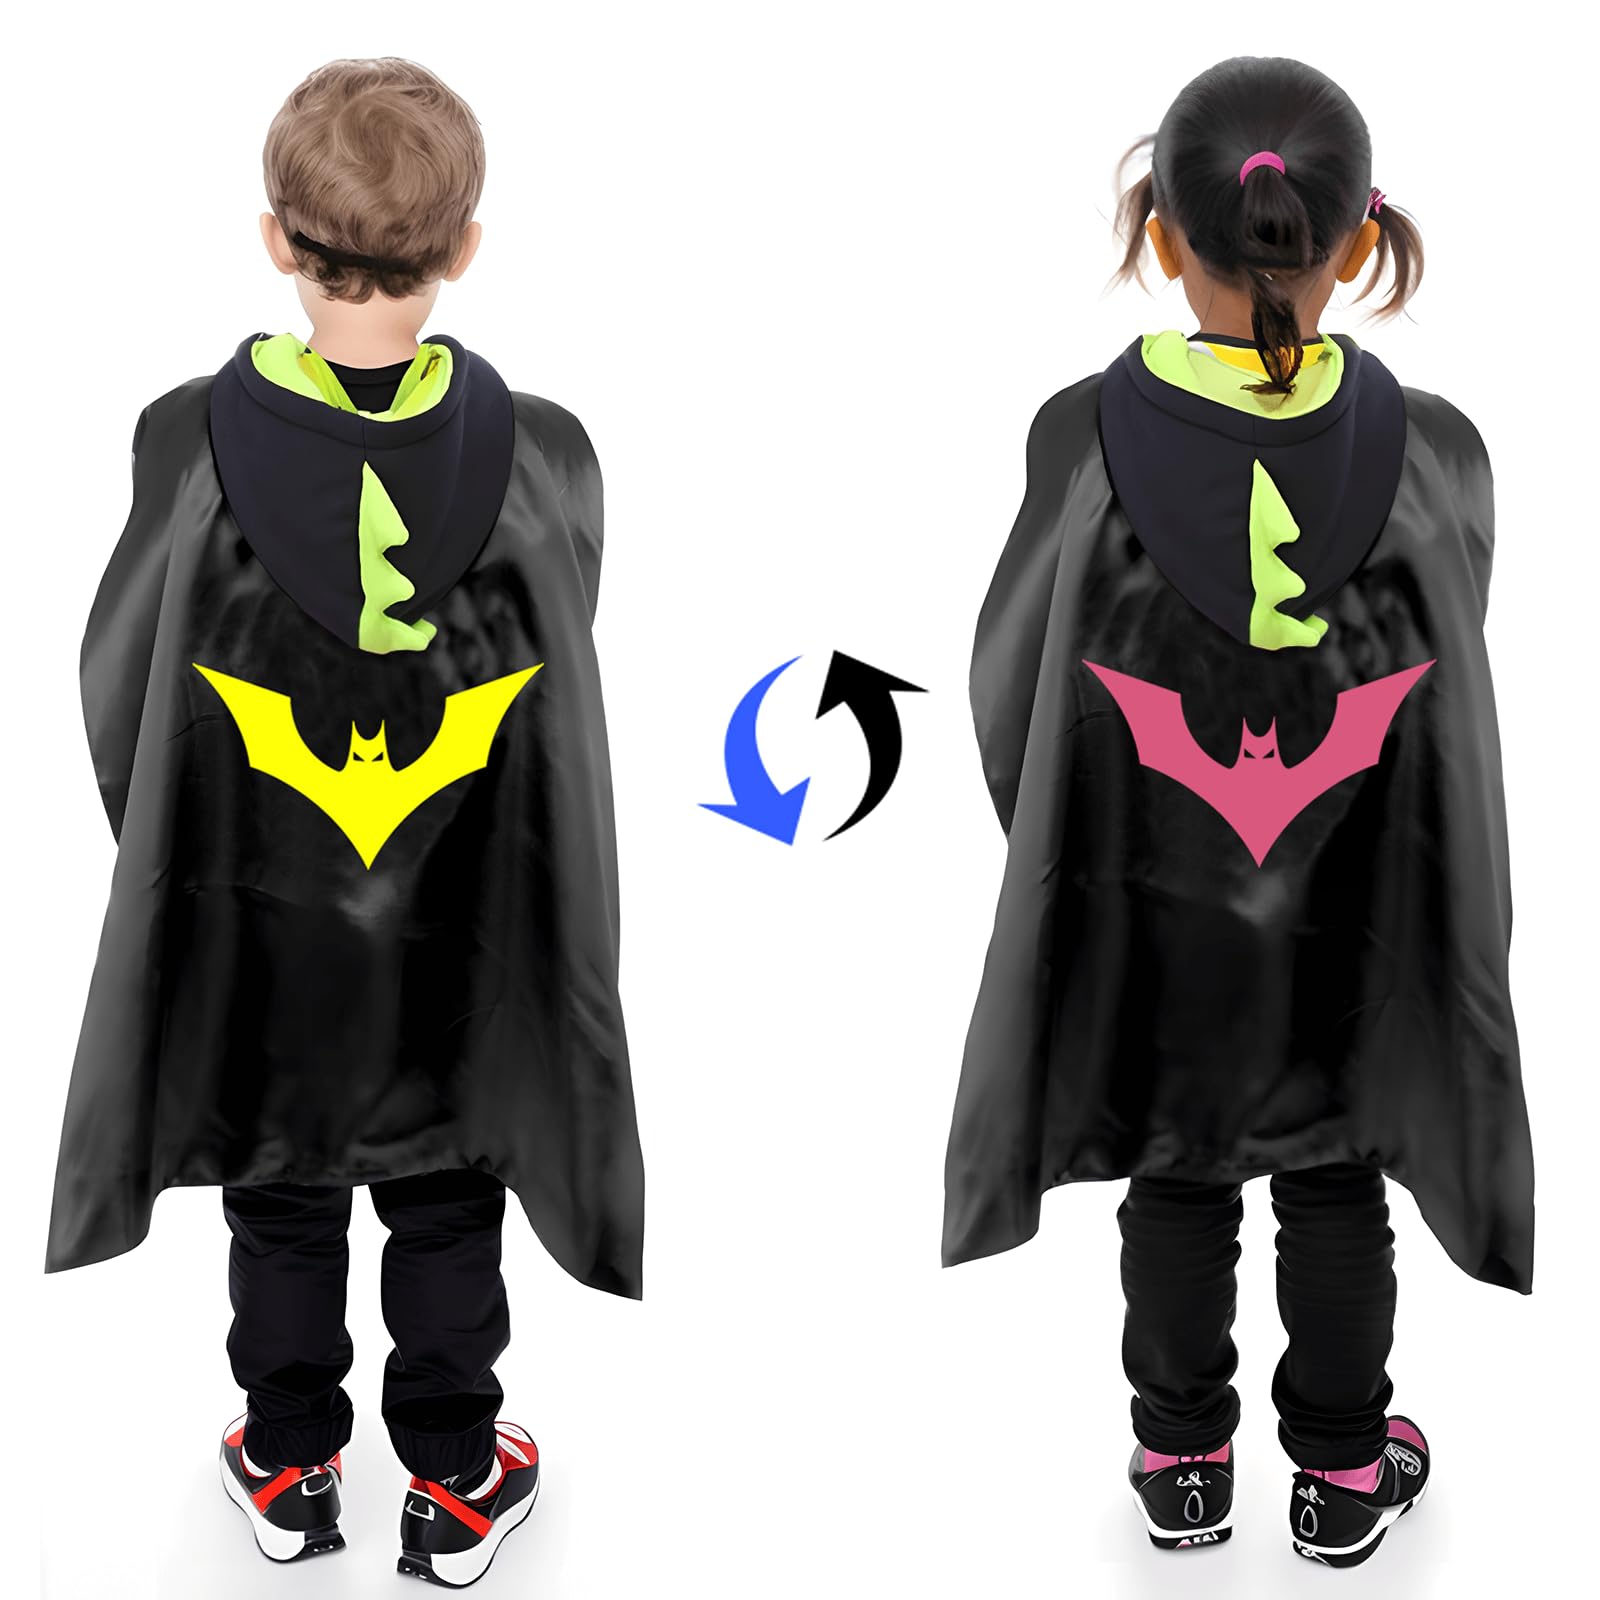 ALAOW Superhero Capes with Masks Double Side Dress up Costumes Festival Christmas Halloween Cosplay Birthday Party for Kids (Double Side-Superheros 4Sest)